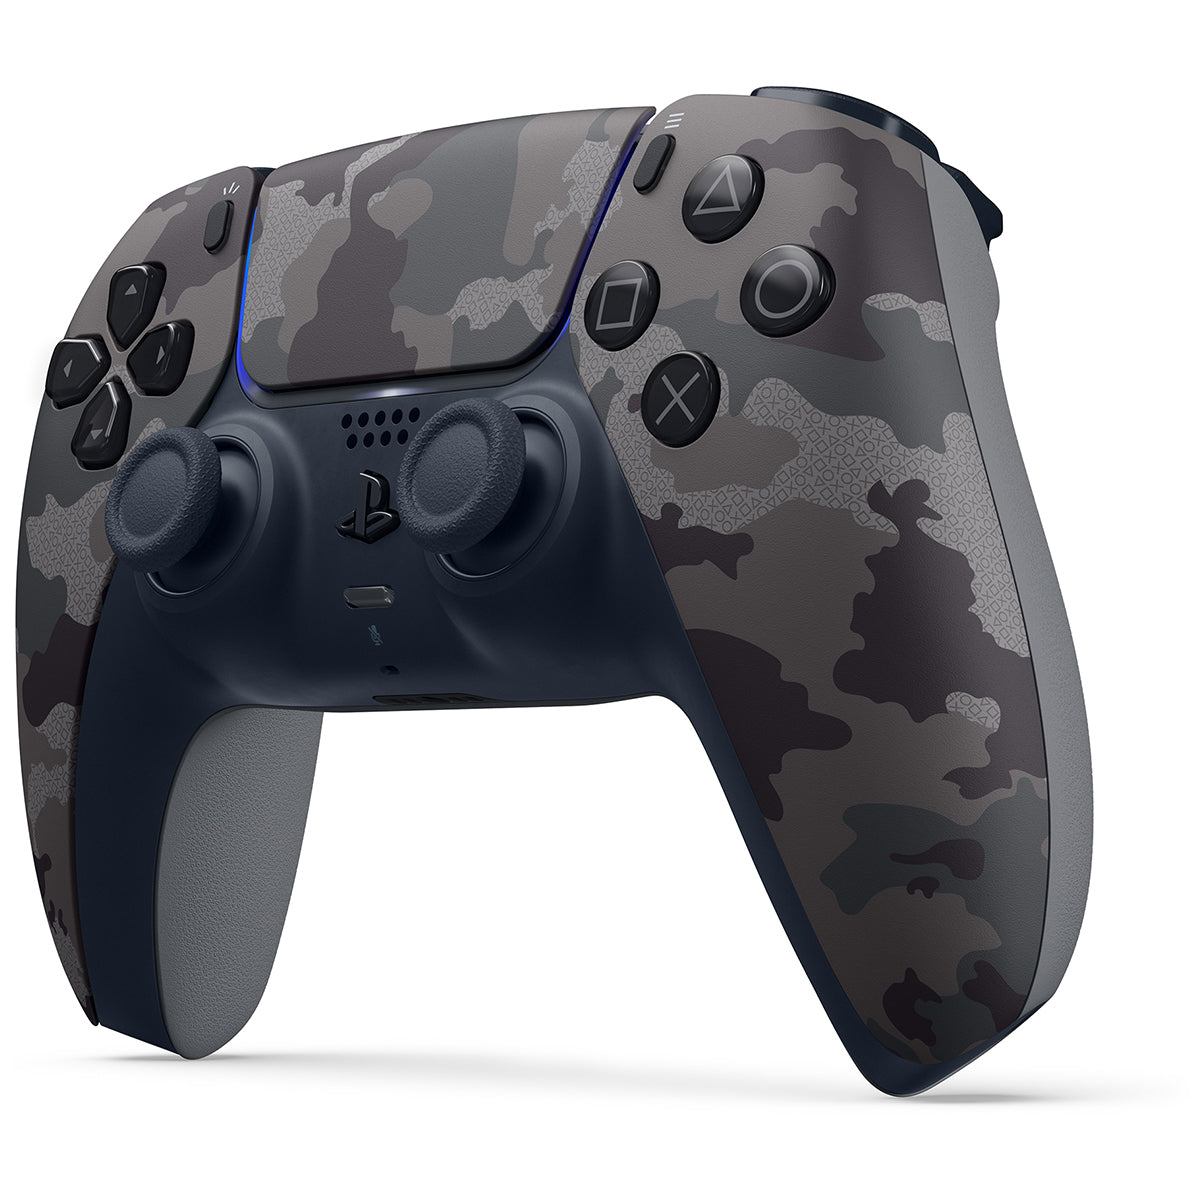 Sony Playstation 5 Disc Edition with Extra Gray Camo Controller and Starter Pack Kit Bundle - Pro-Distributing